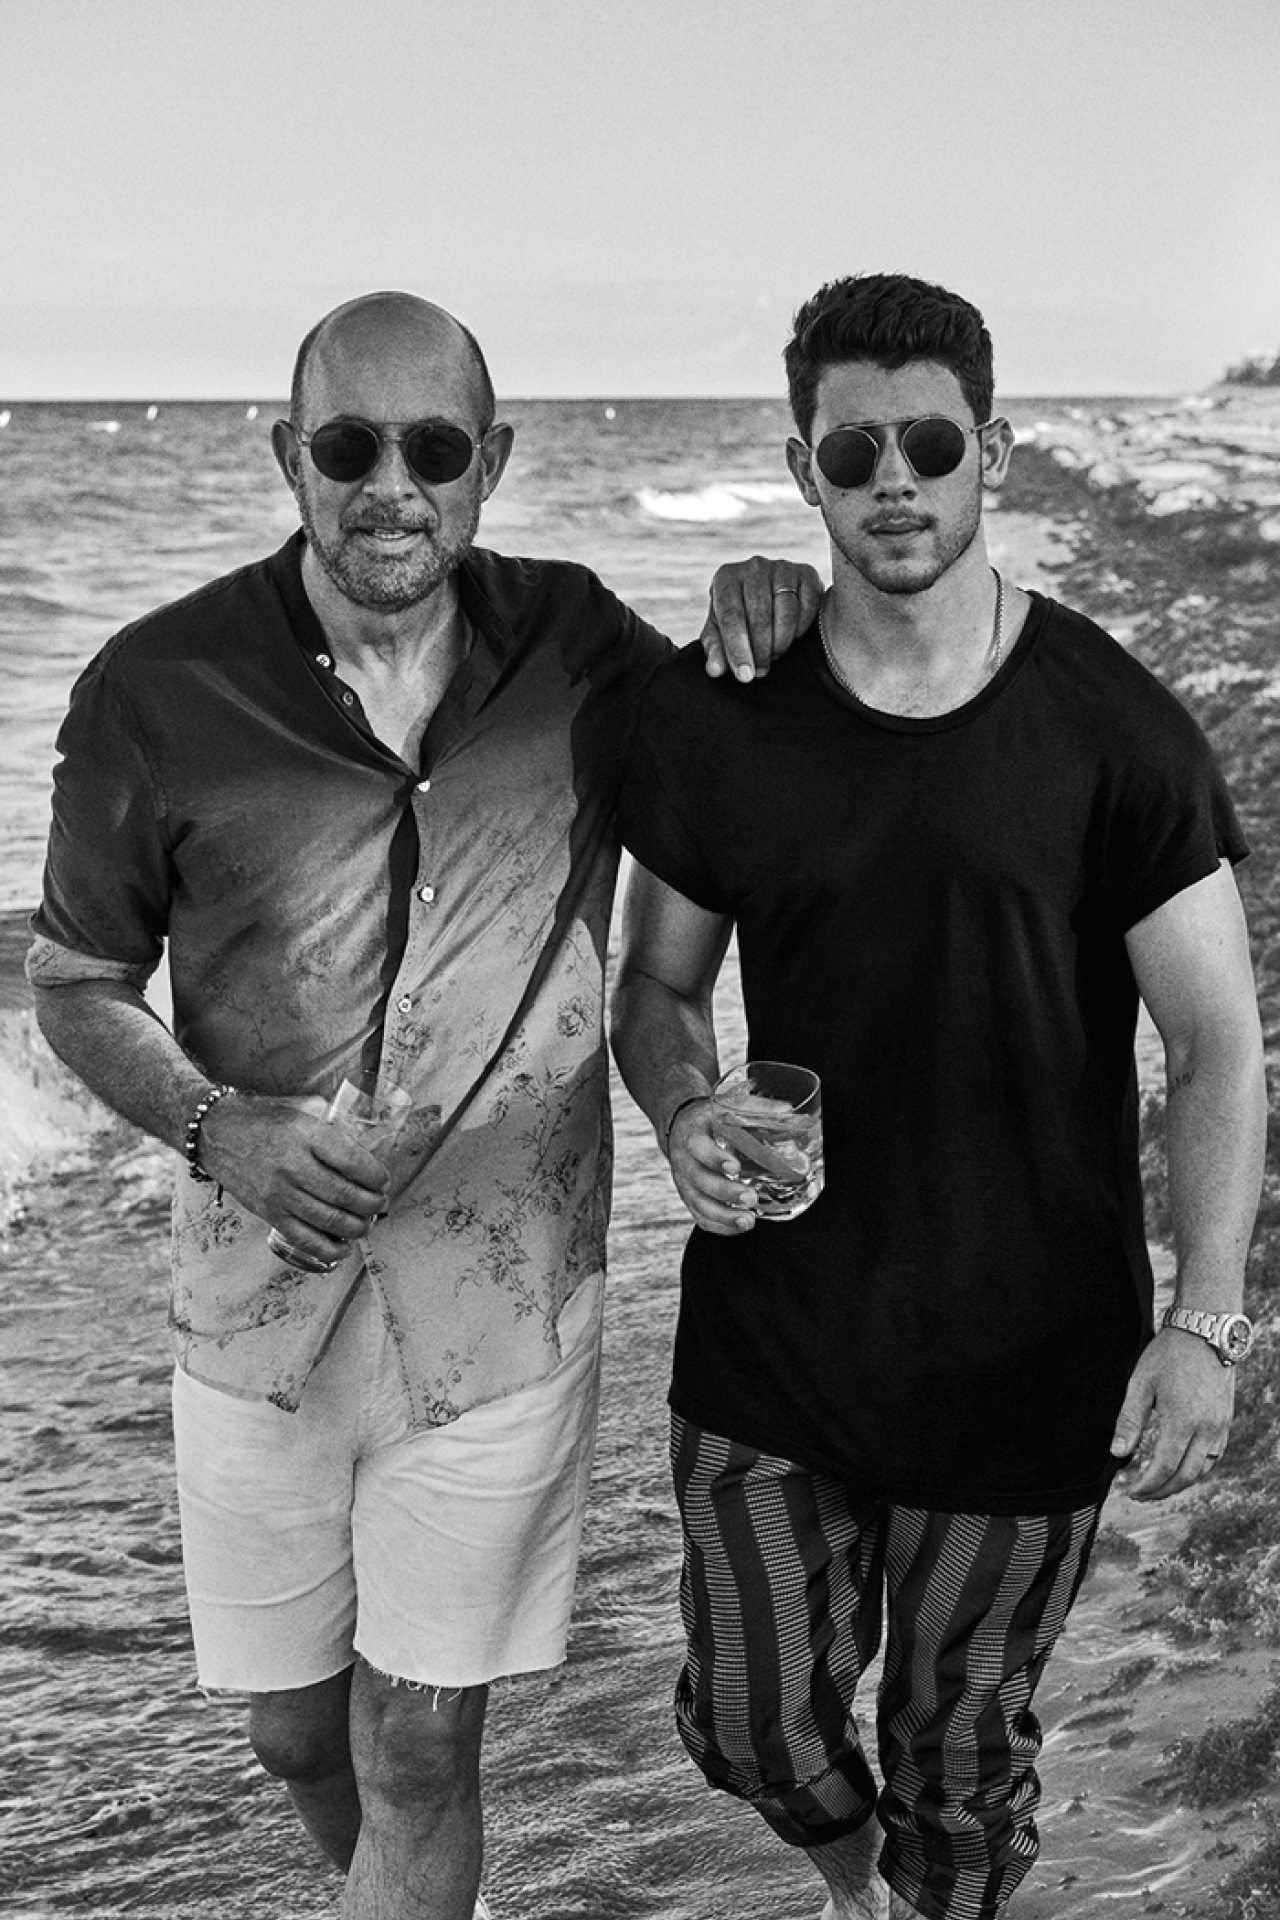 John Varvatos and Nick Jonas sipping Villa One Tequila on a beach